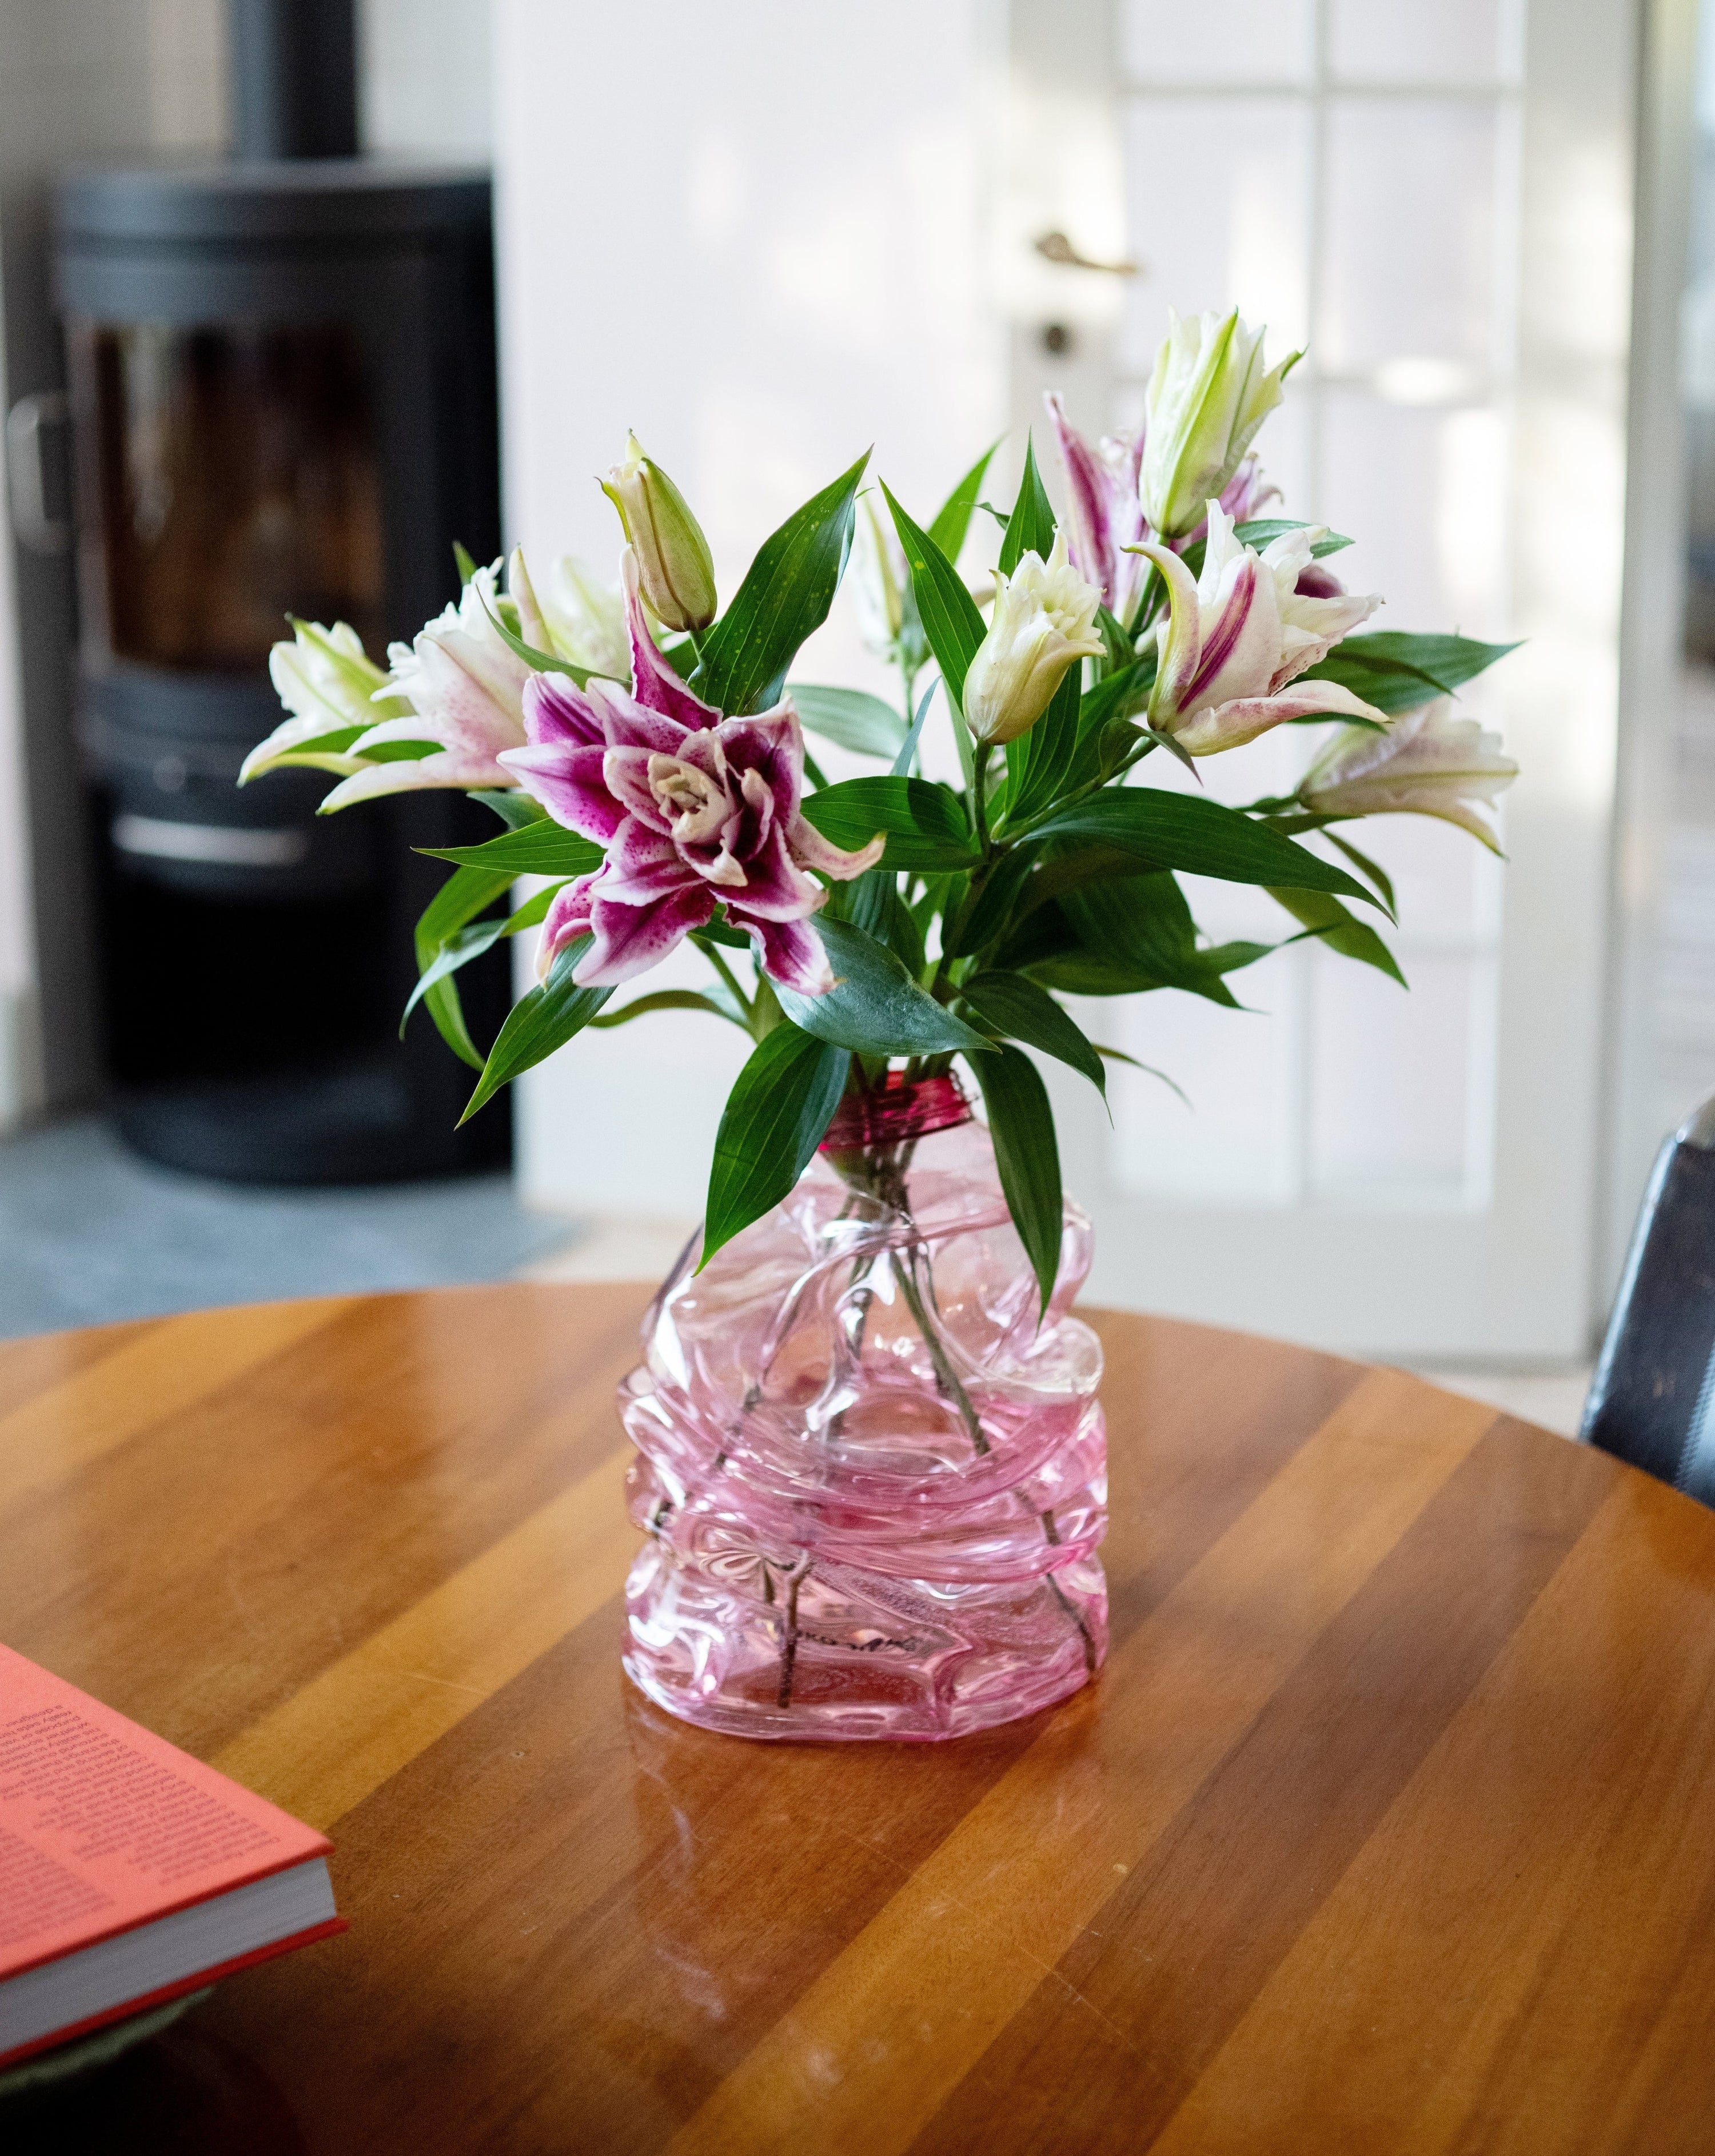 Medium pink handmade recycled plastic vase with pink lillies on the table background